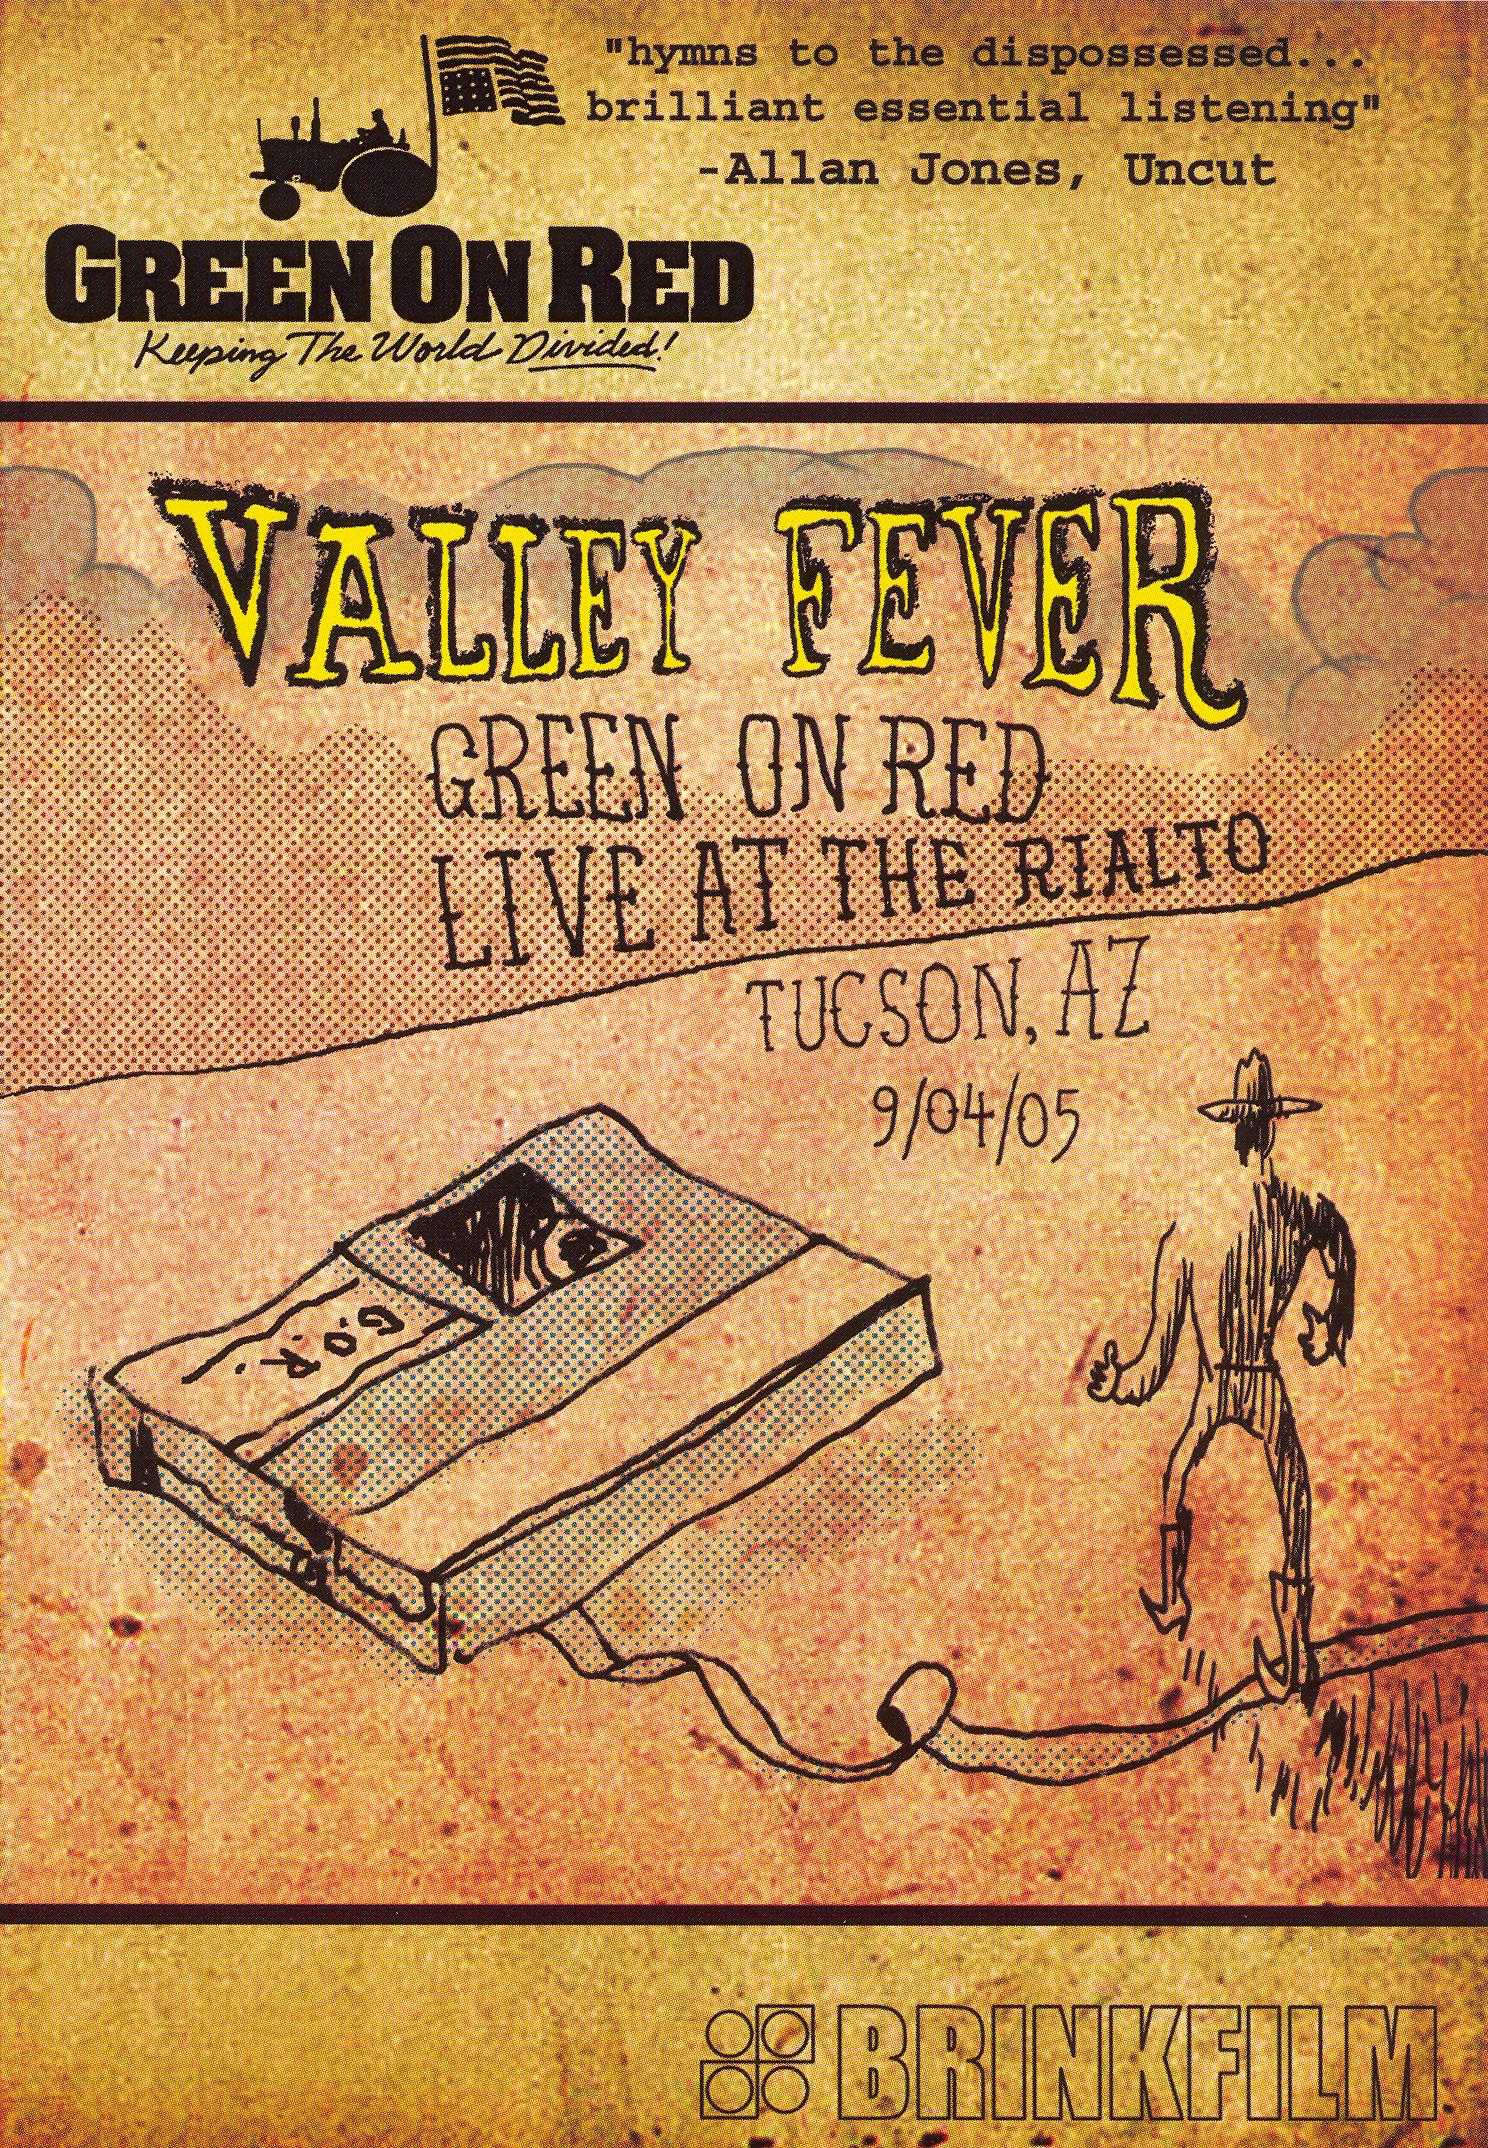 Valley Fever: Green on Red, Live at Rialto - Tucson, AZ 9/04/05 cover art